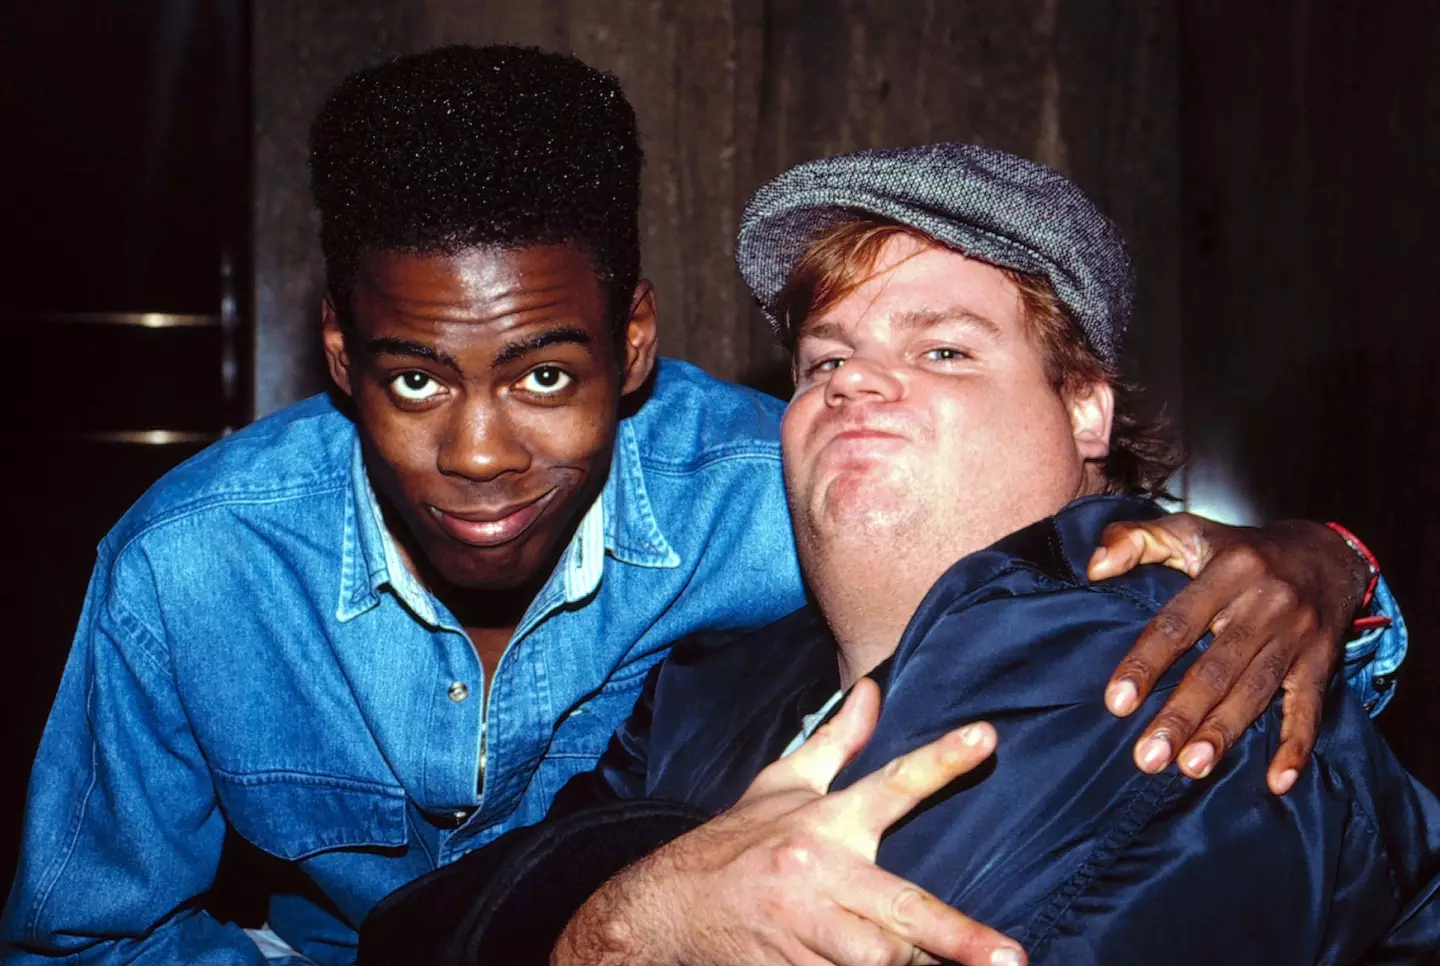 Chris Rock (left) and Chris Farley (right) sparked up an amazing friendship on NBC's SNL.